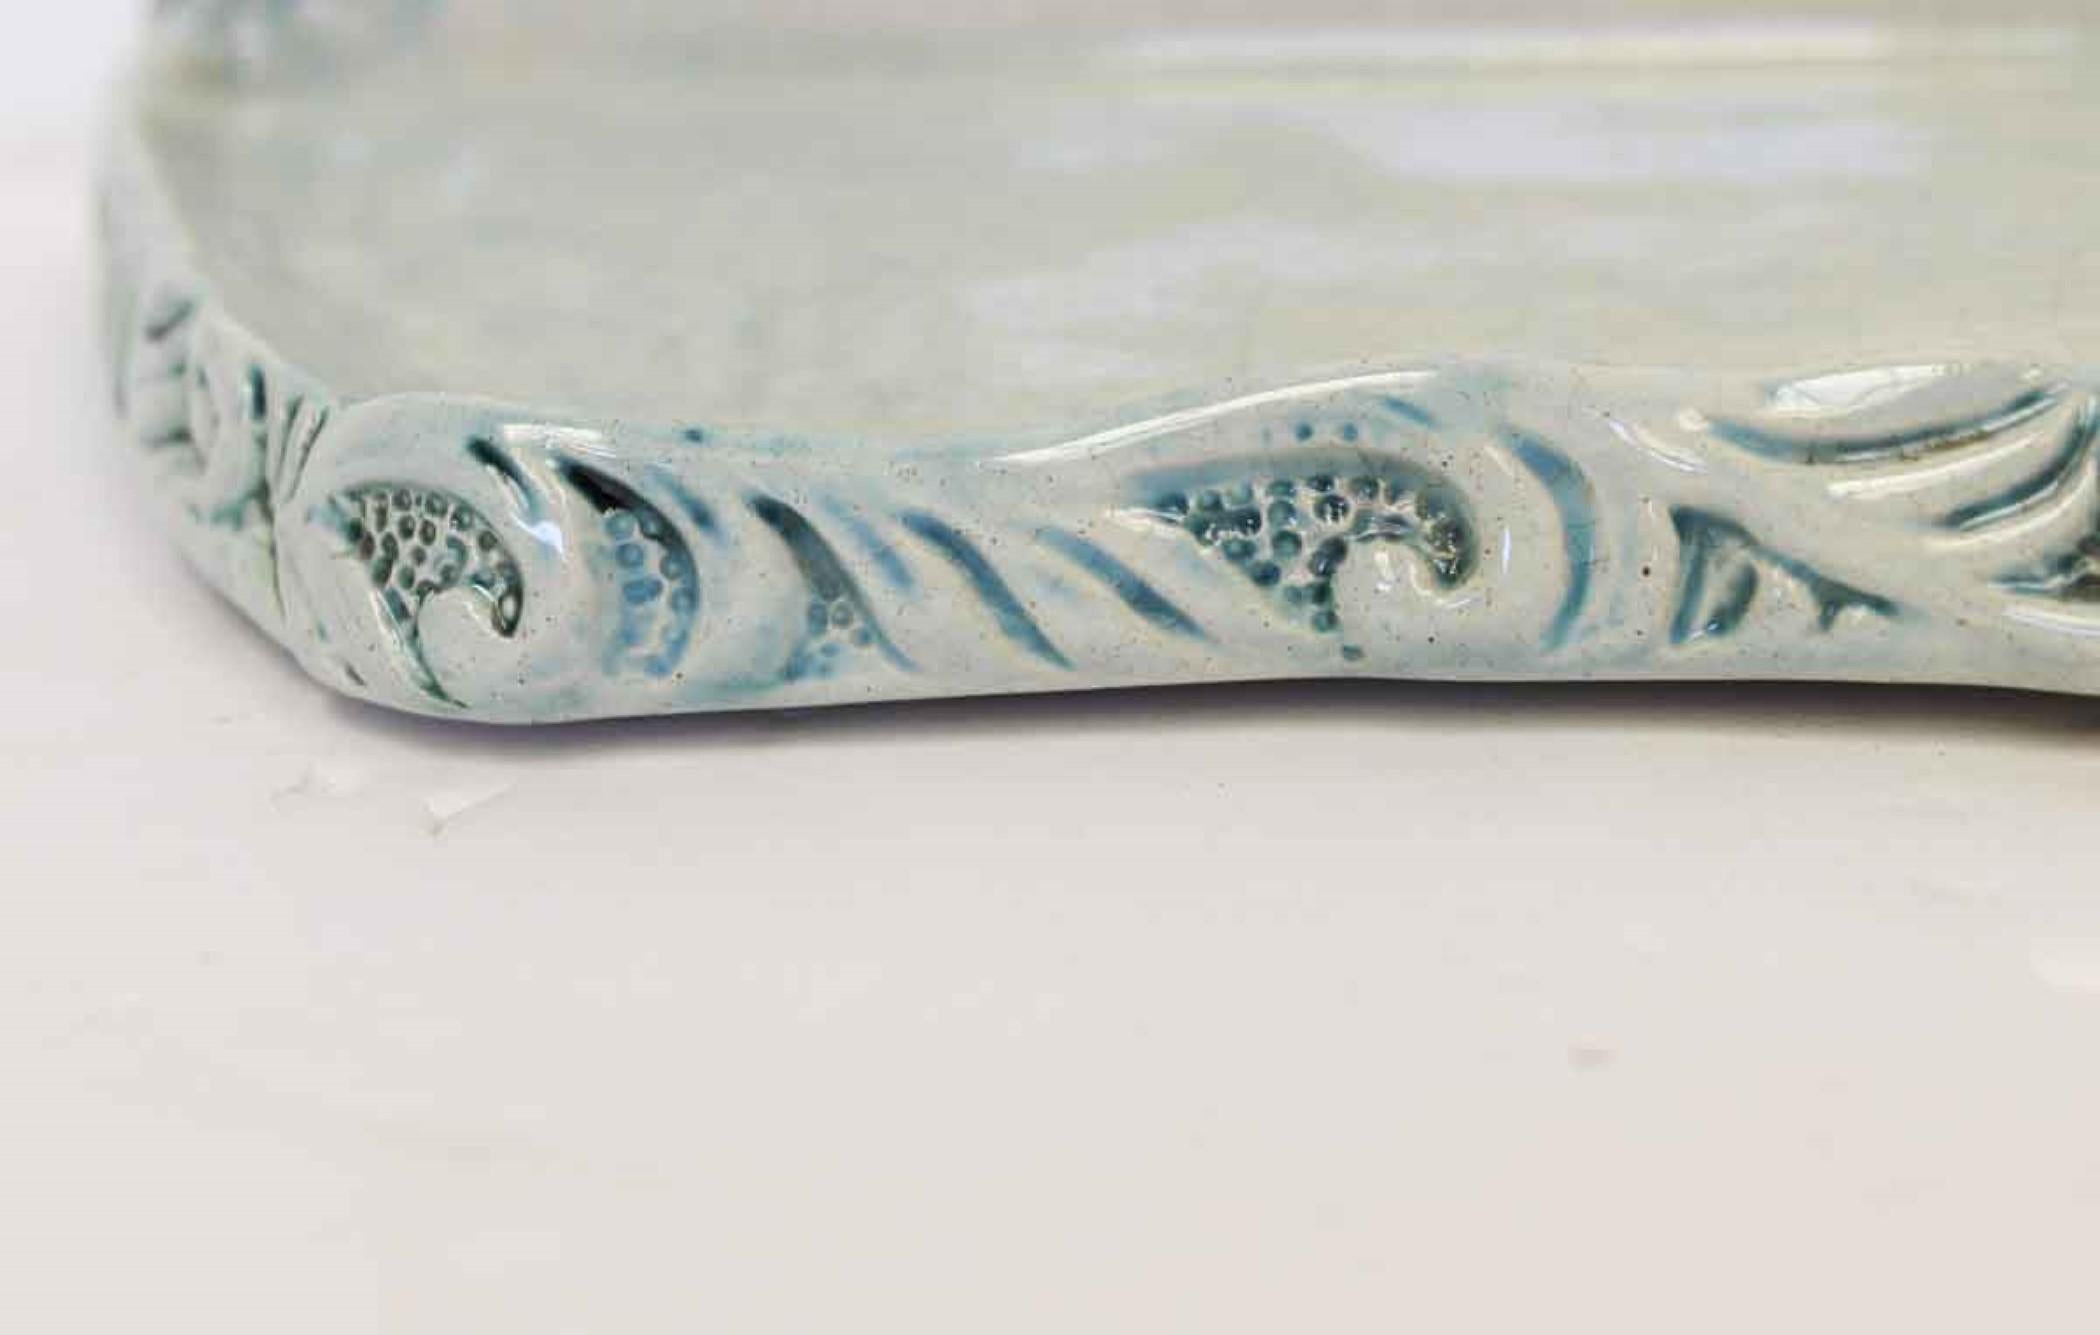 1960s Italian Porcelain Wall Shelf with Floral Details and Crackled Glaze 1